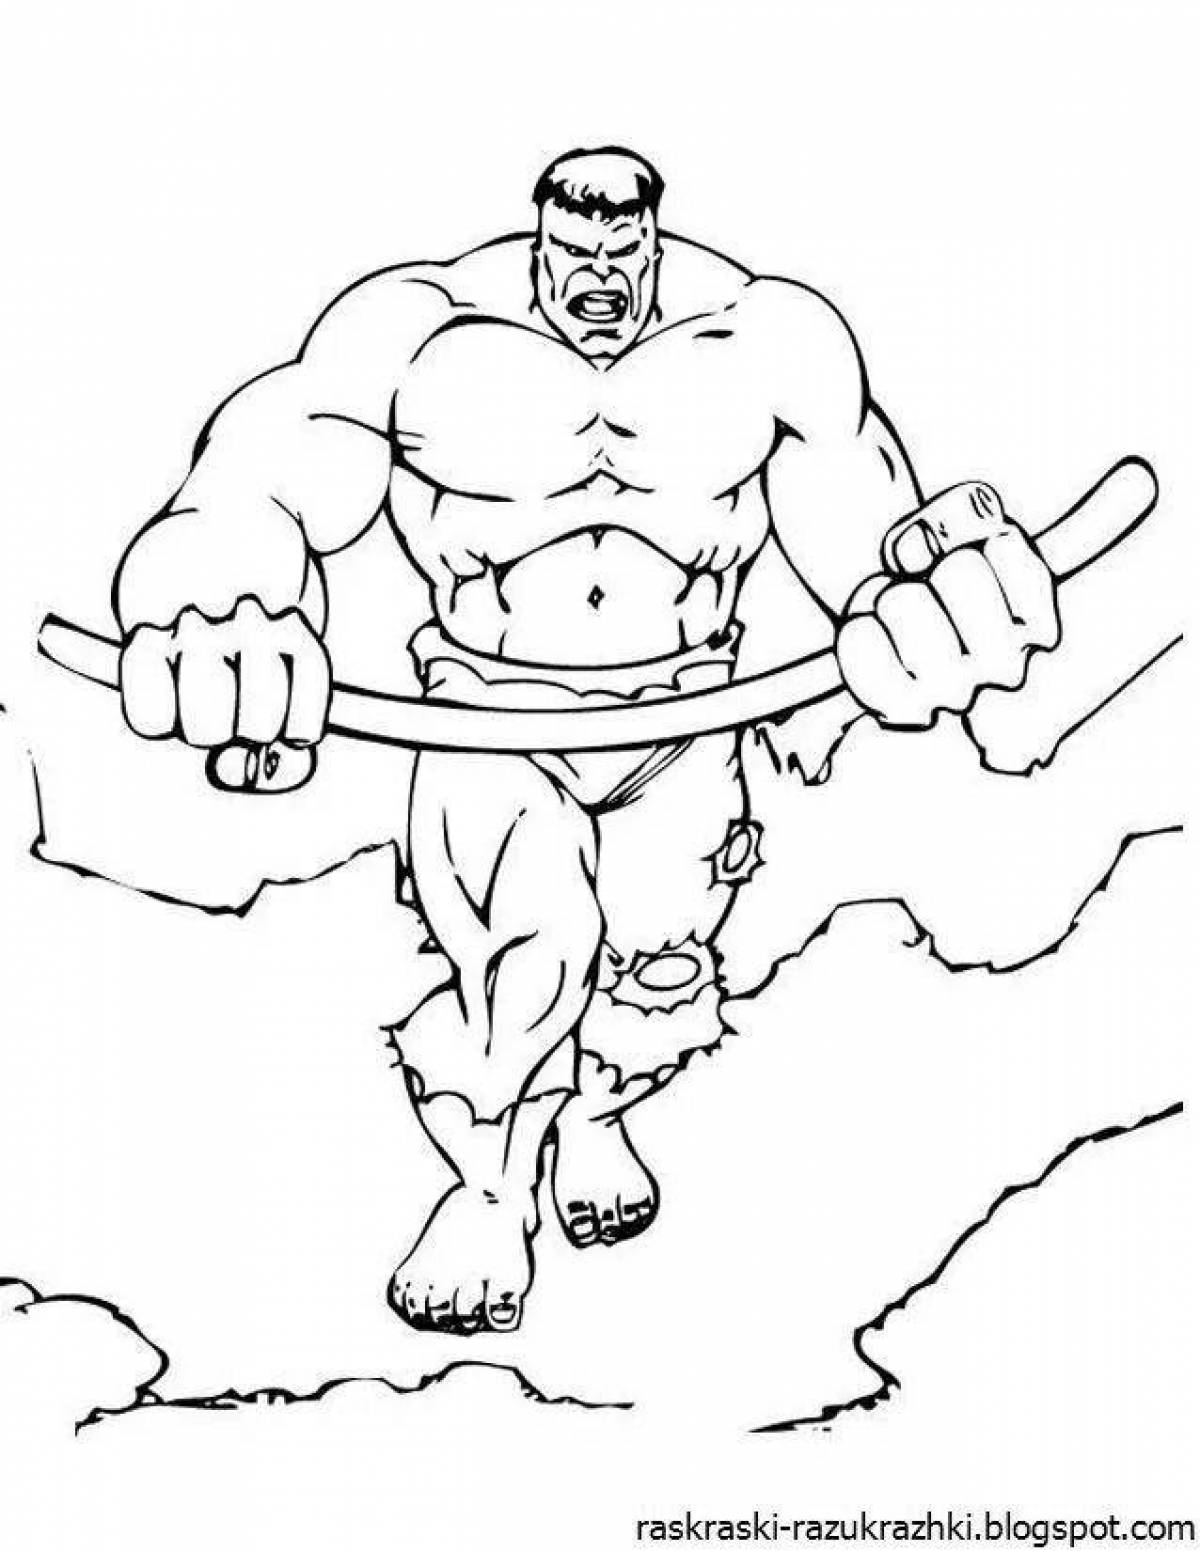 Amazing Hulk Coloring Page for 6-7 year olds